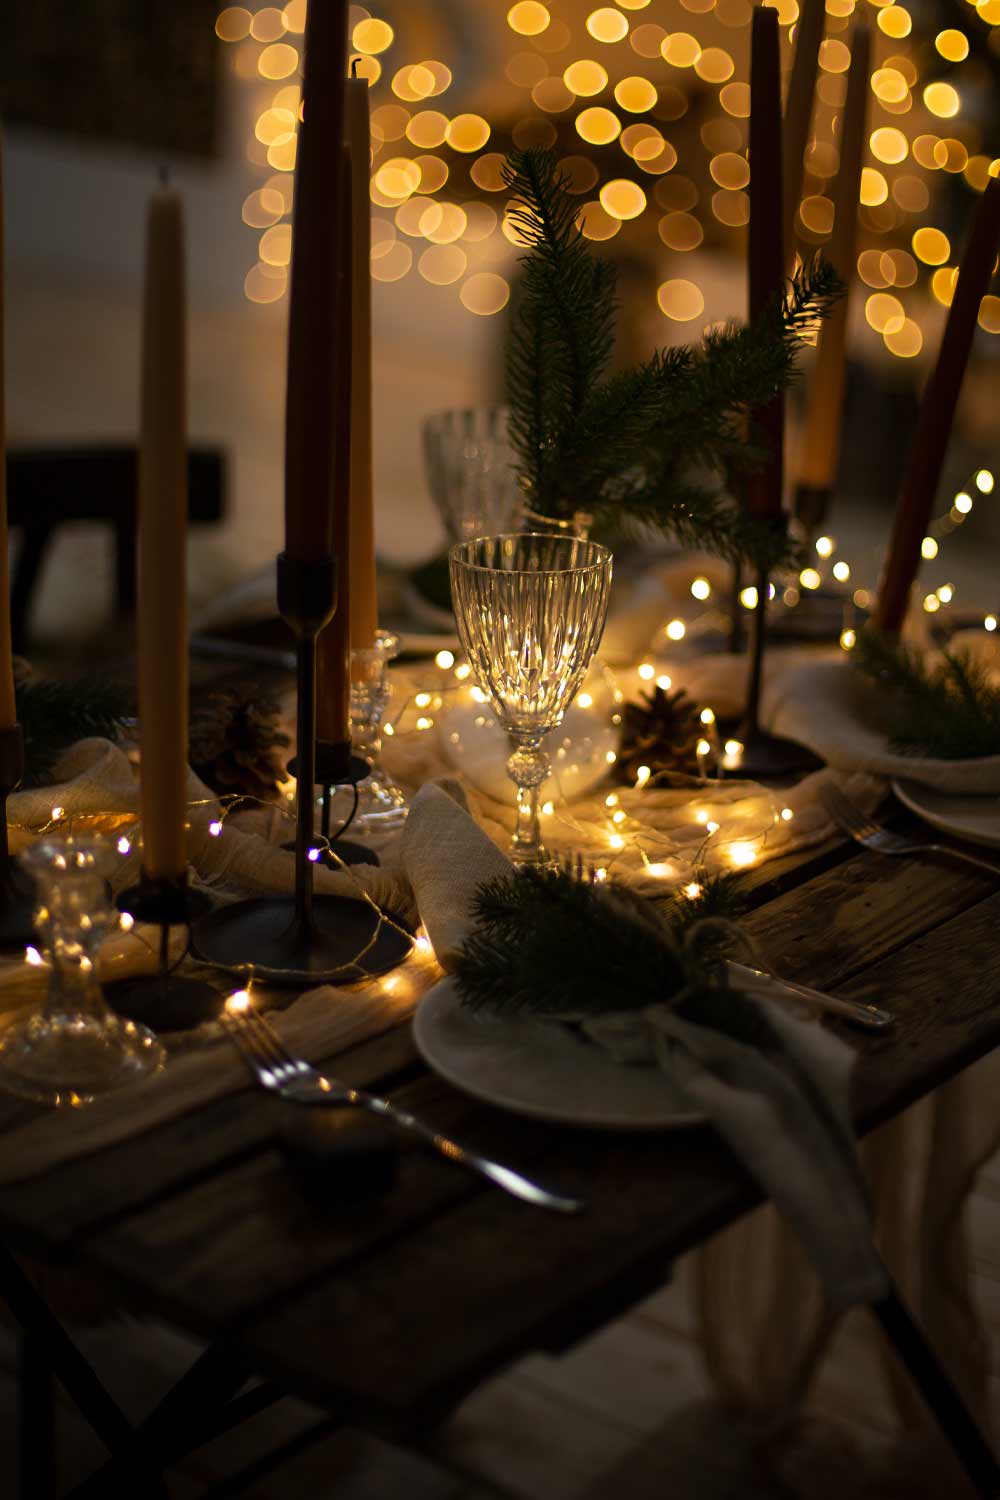 Dinner Table Decoration with Christmas Lights